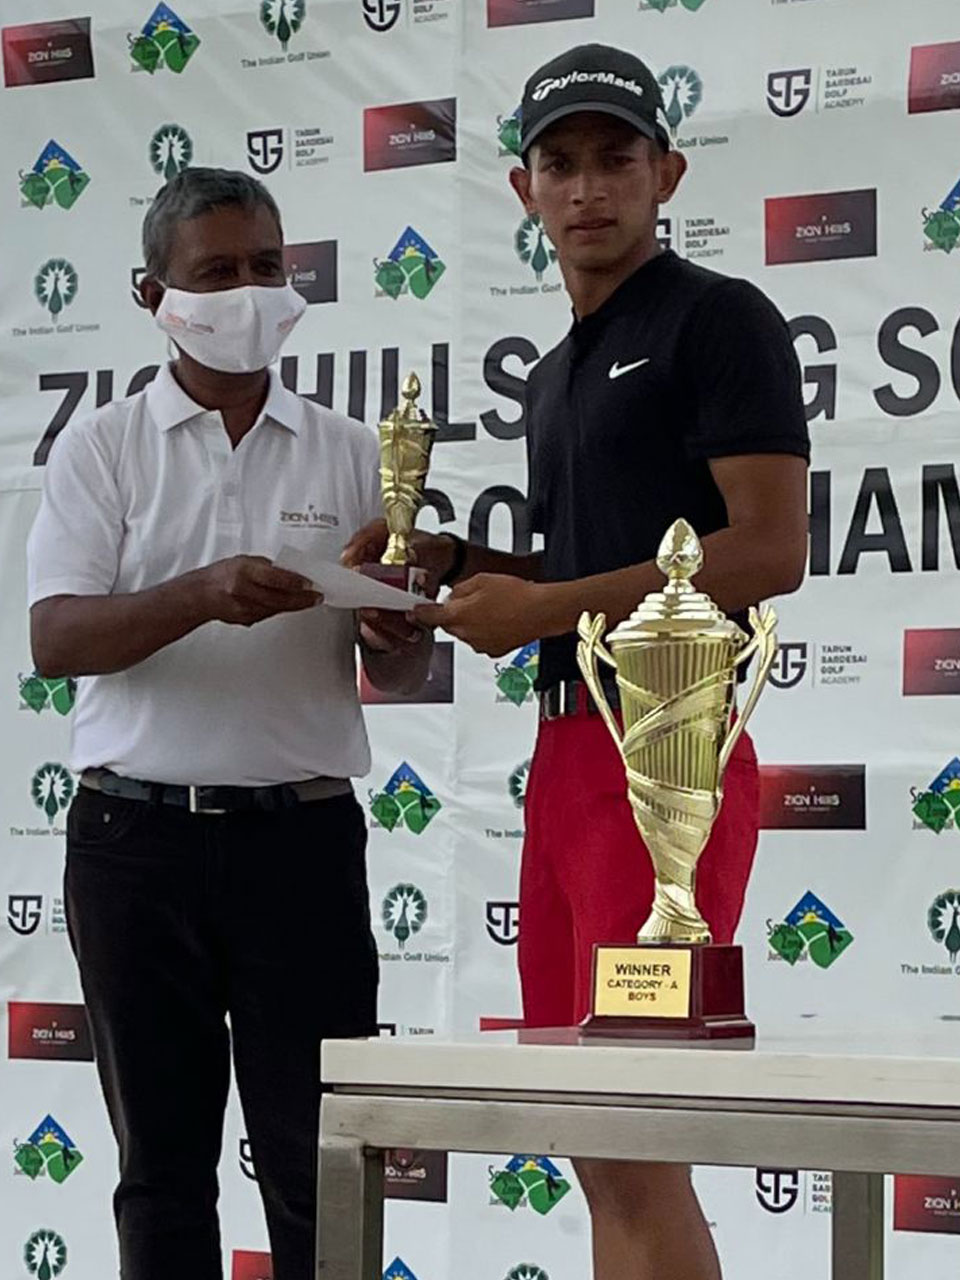 Sumit Kotwal is first runner-up in Category A Boys at the Zion Hills